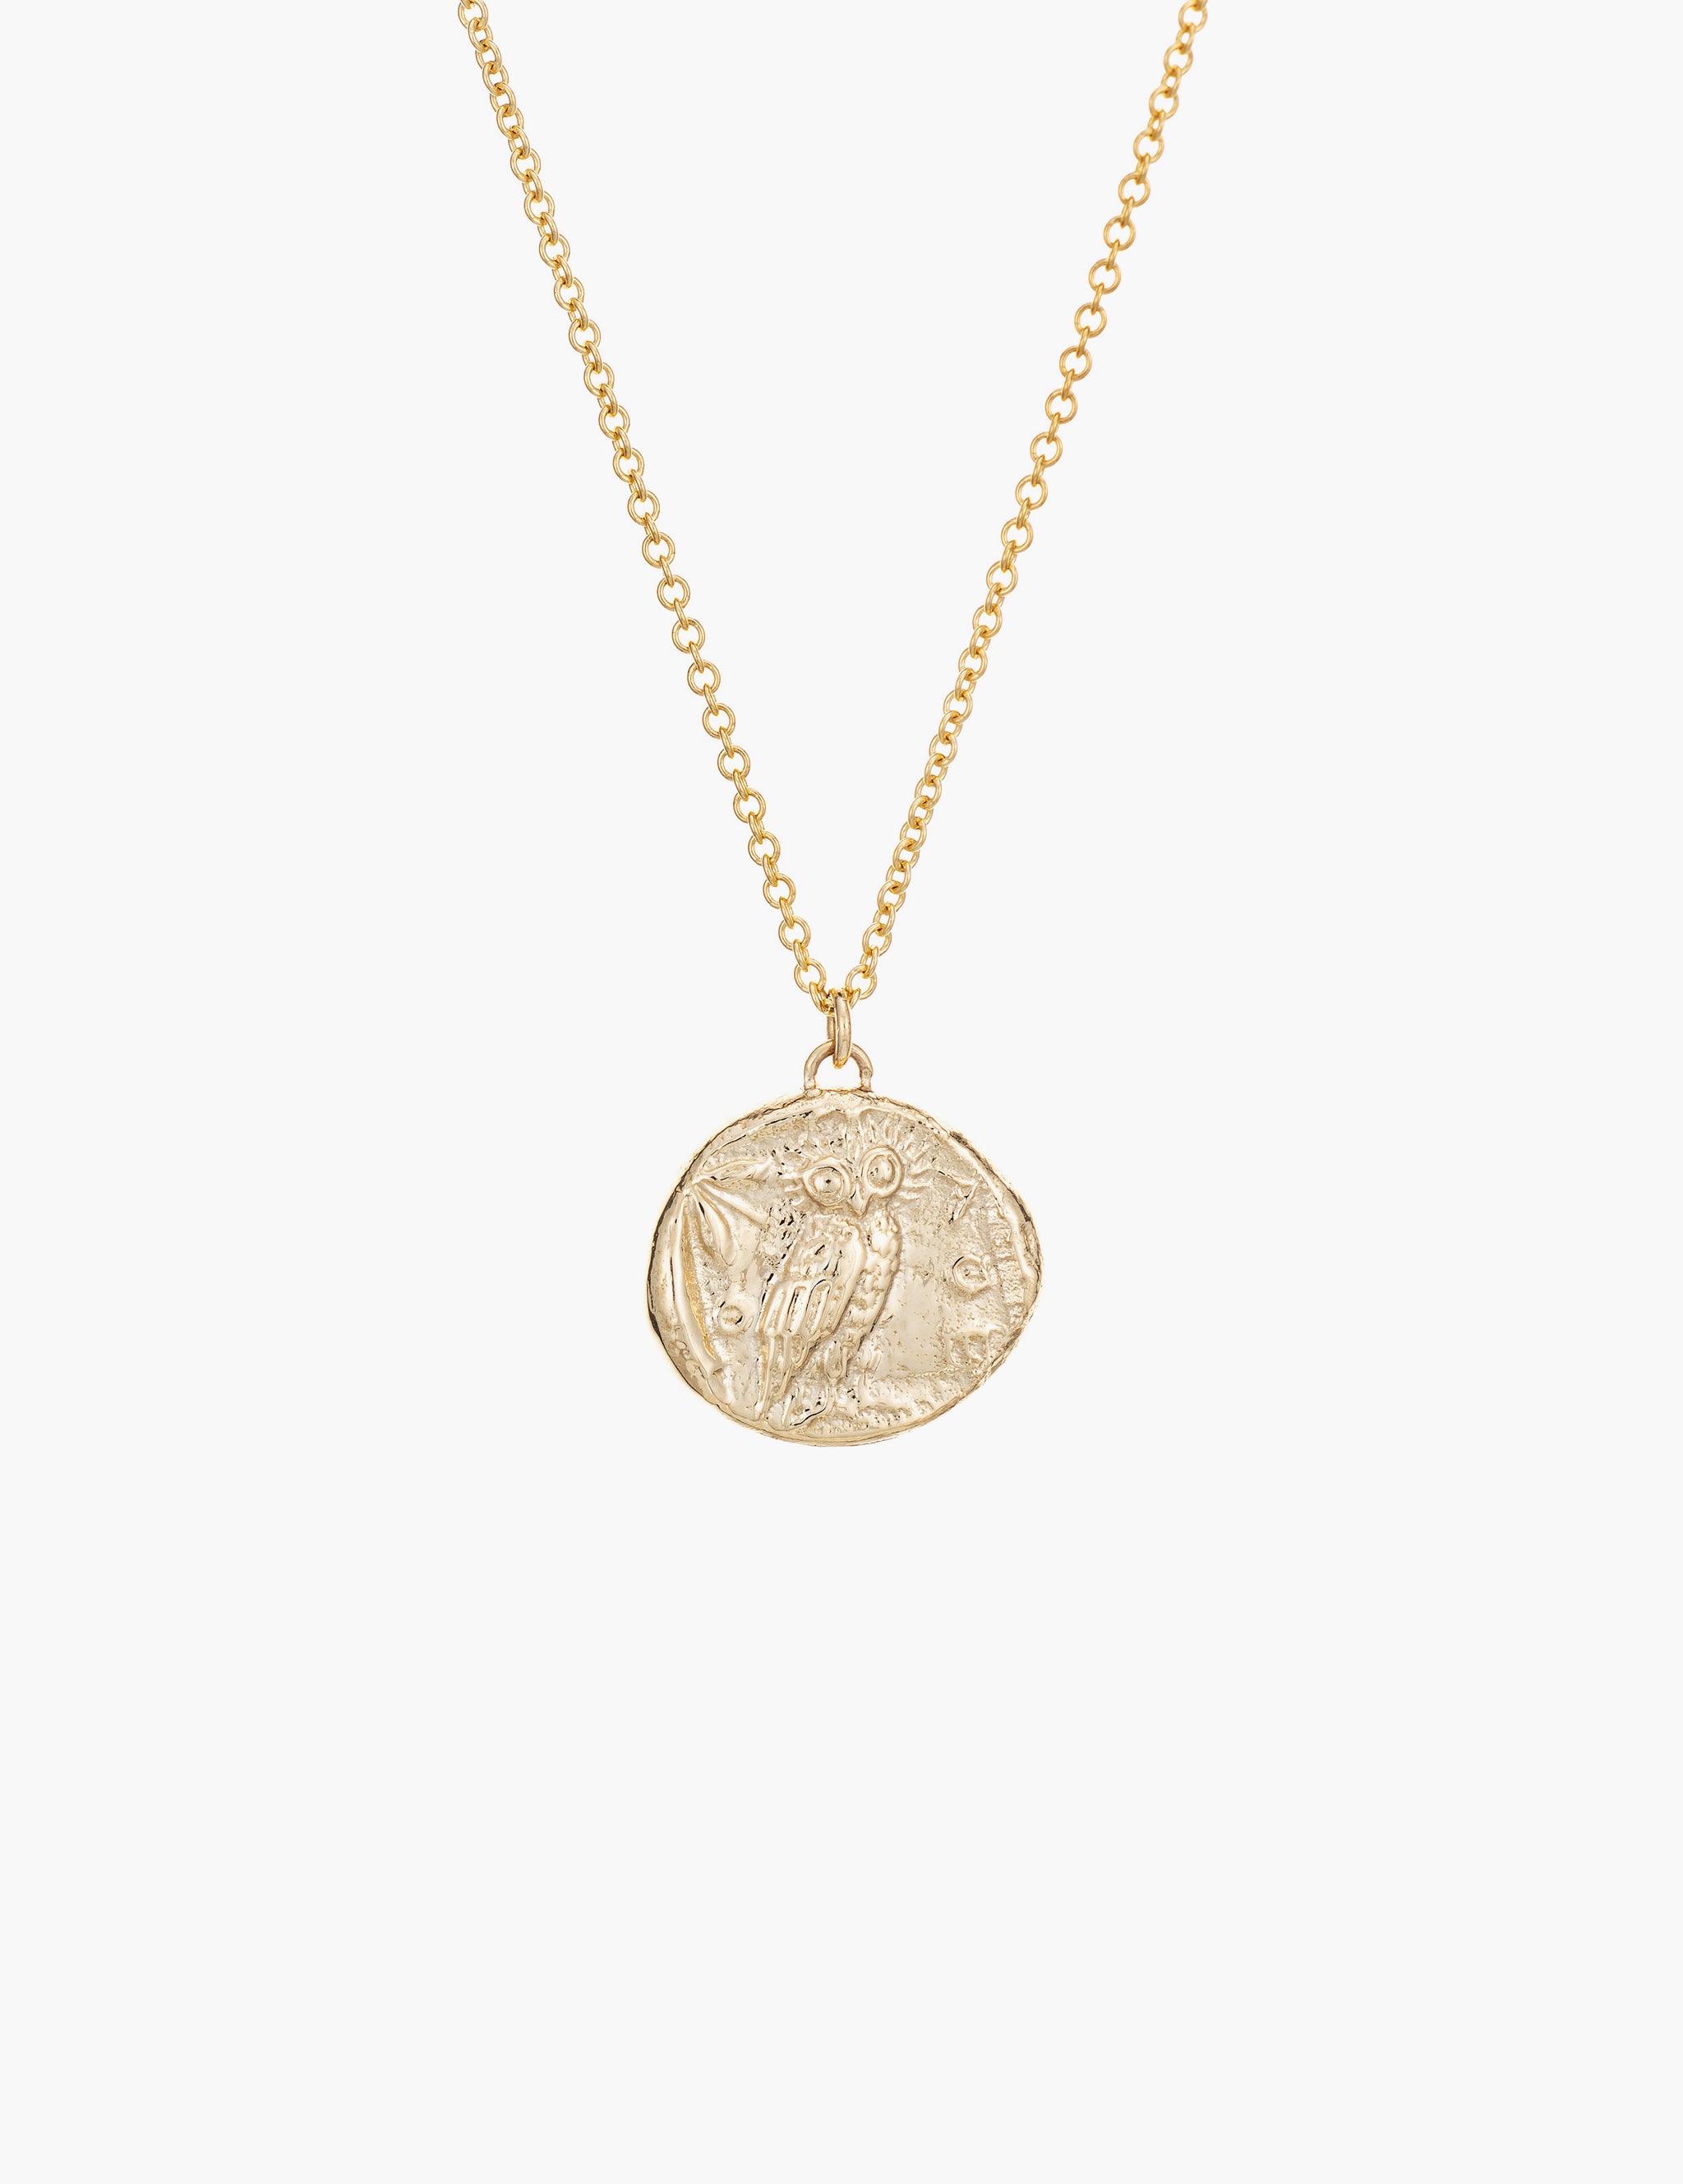 Ancient Greek Gold Coin Pendant with Goddess Athena, Ancient Greece Coin  Necklace, Statement Unisex Necklace, Gift for Him/Her